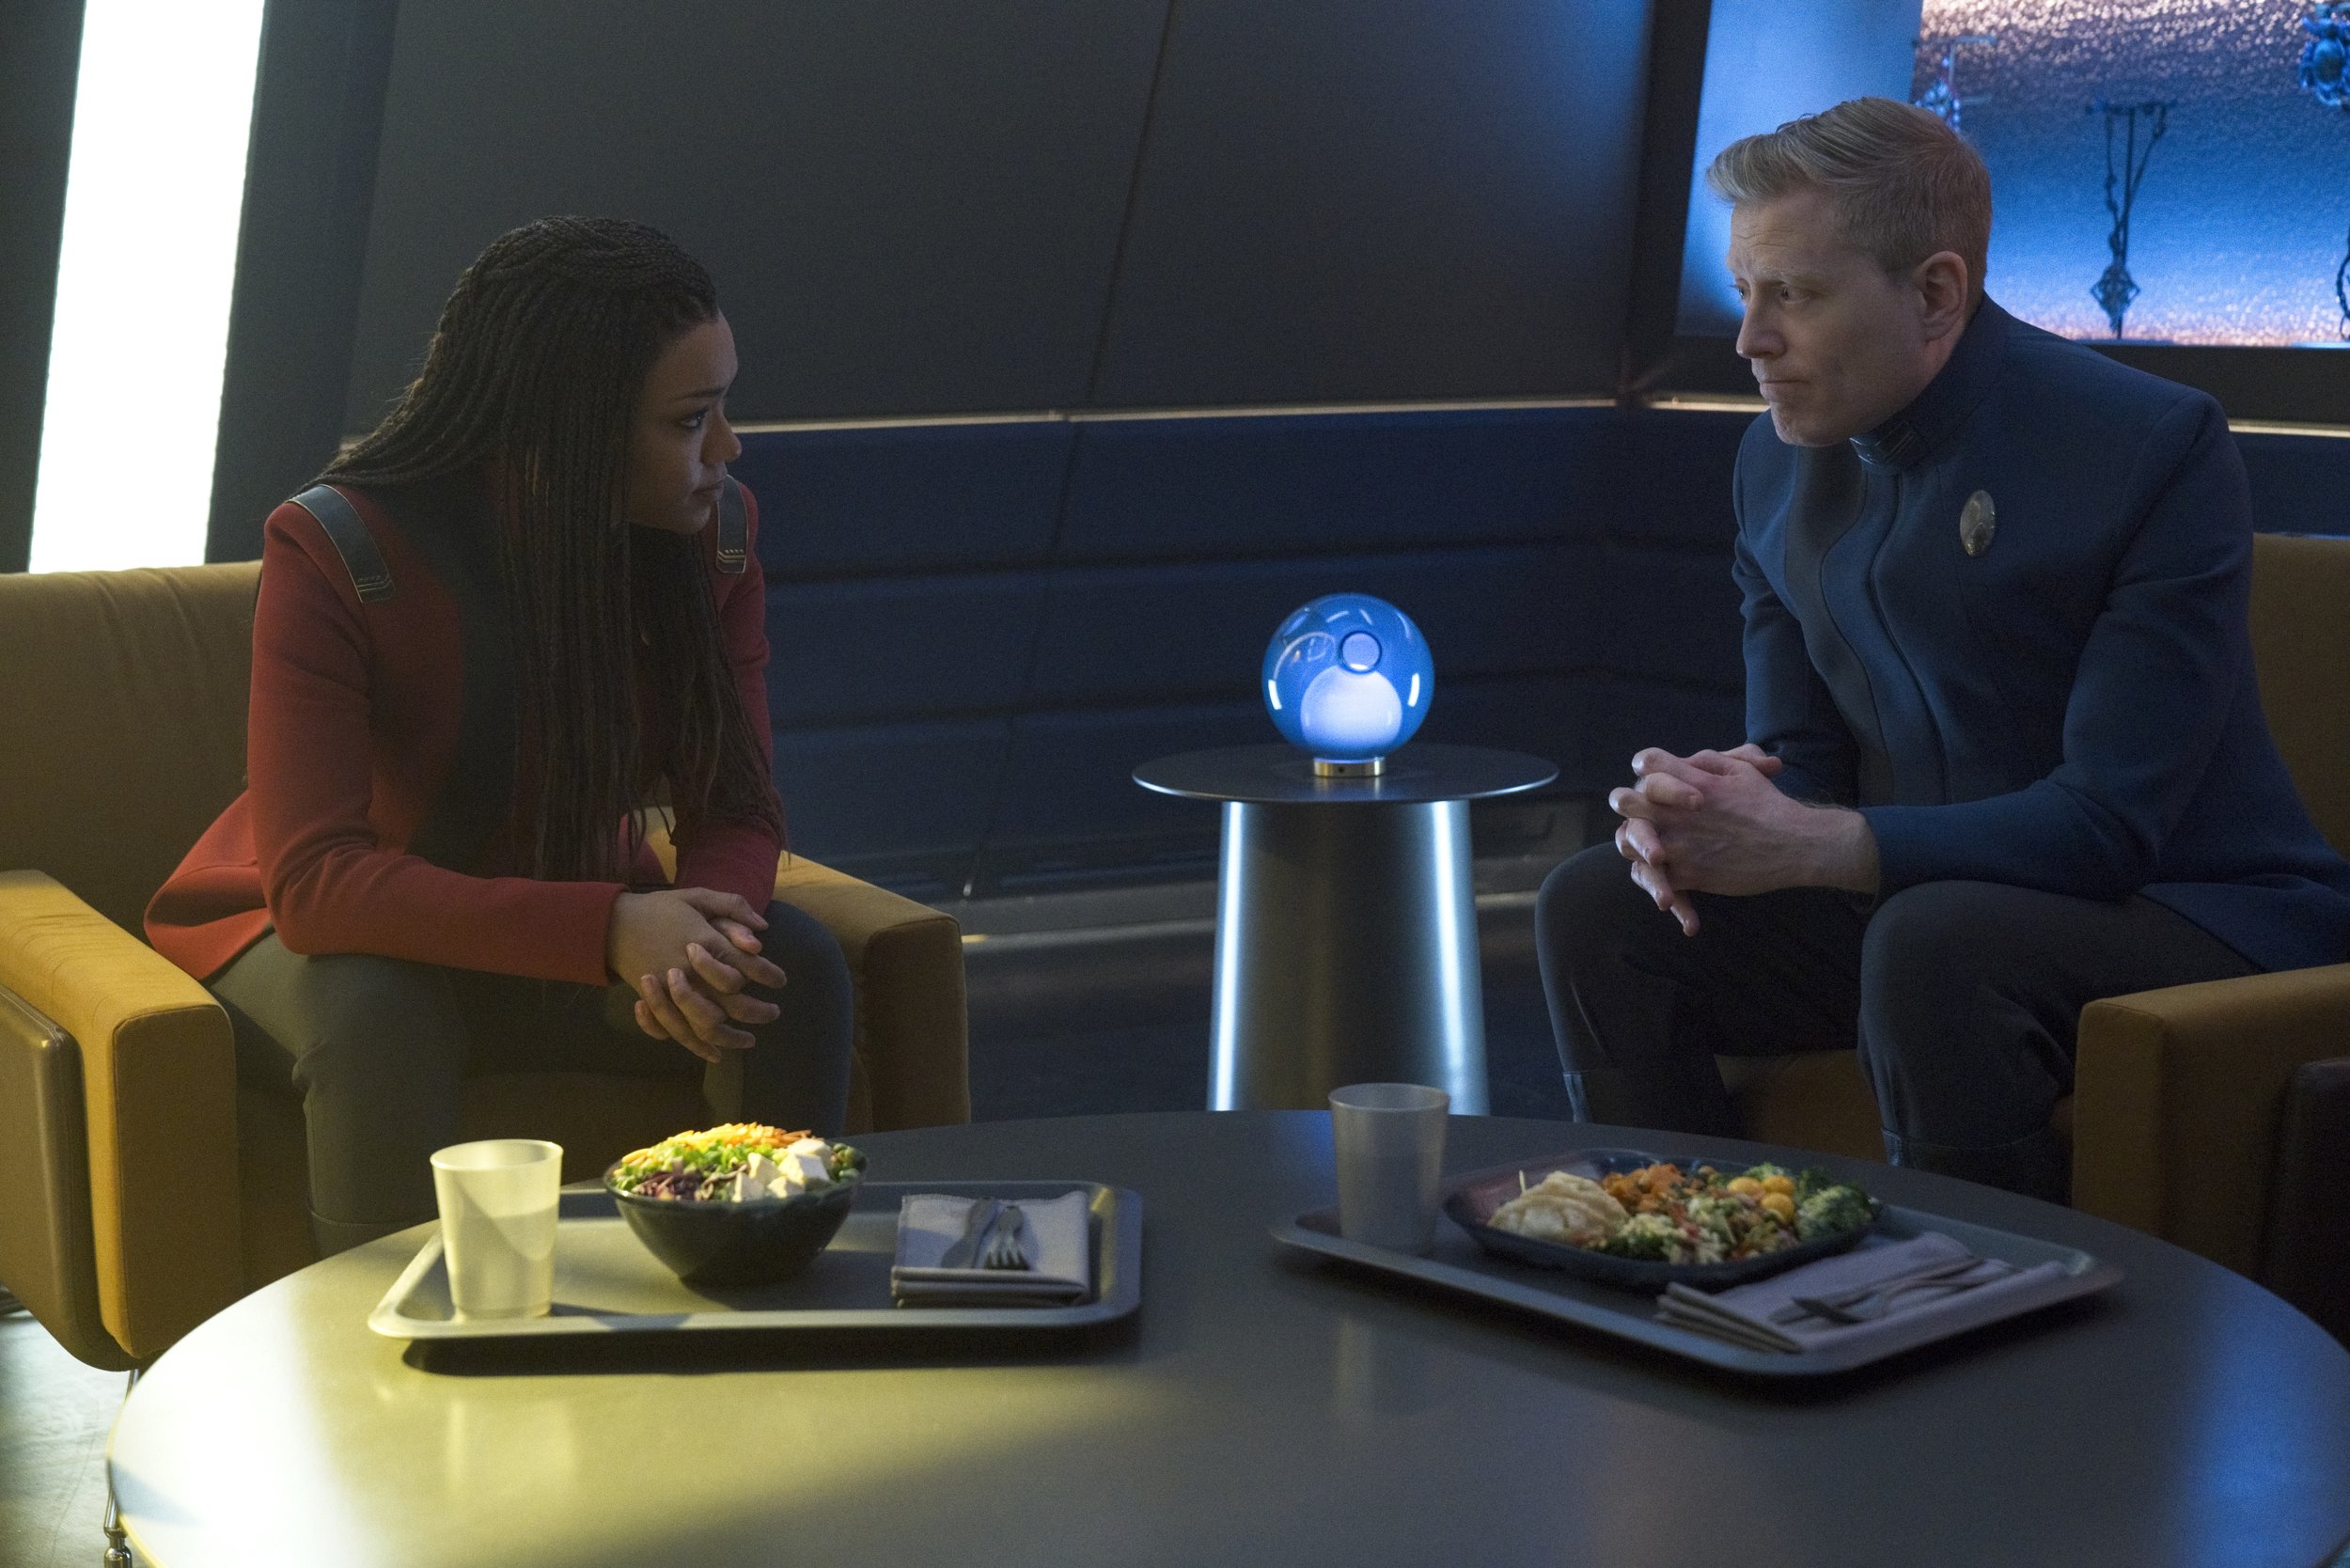   Pictured: Sonequa Martin Green as Burnham and Anthony Rapp as Stamets of the Paramount+ original series STAR TREK: DISCOVERY. Photo Cr: Michael Gibson/Paramount+ © 2021 CBS Interactive. All Rights Reserved.  